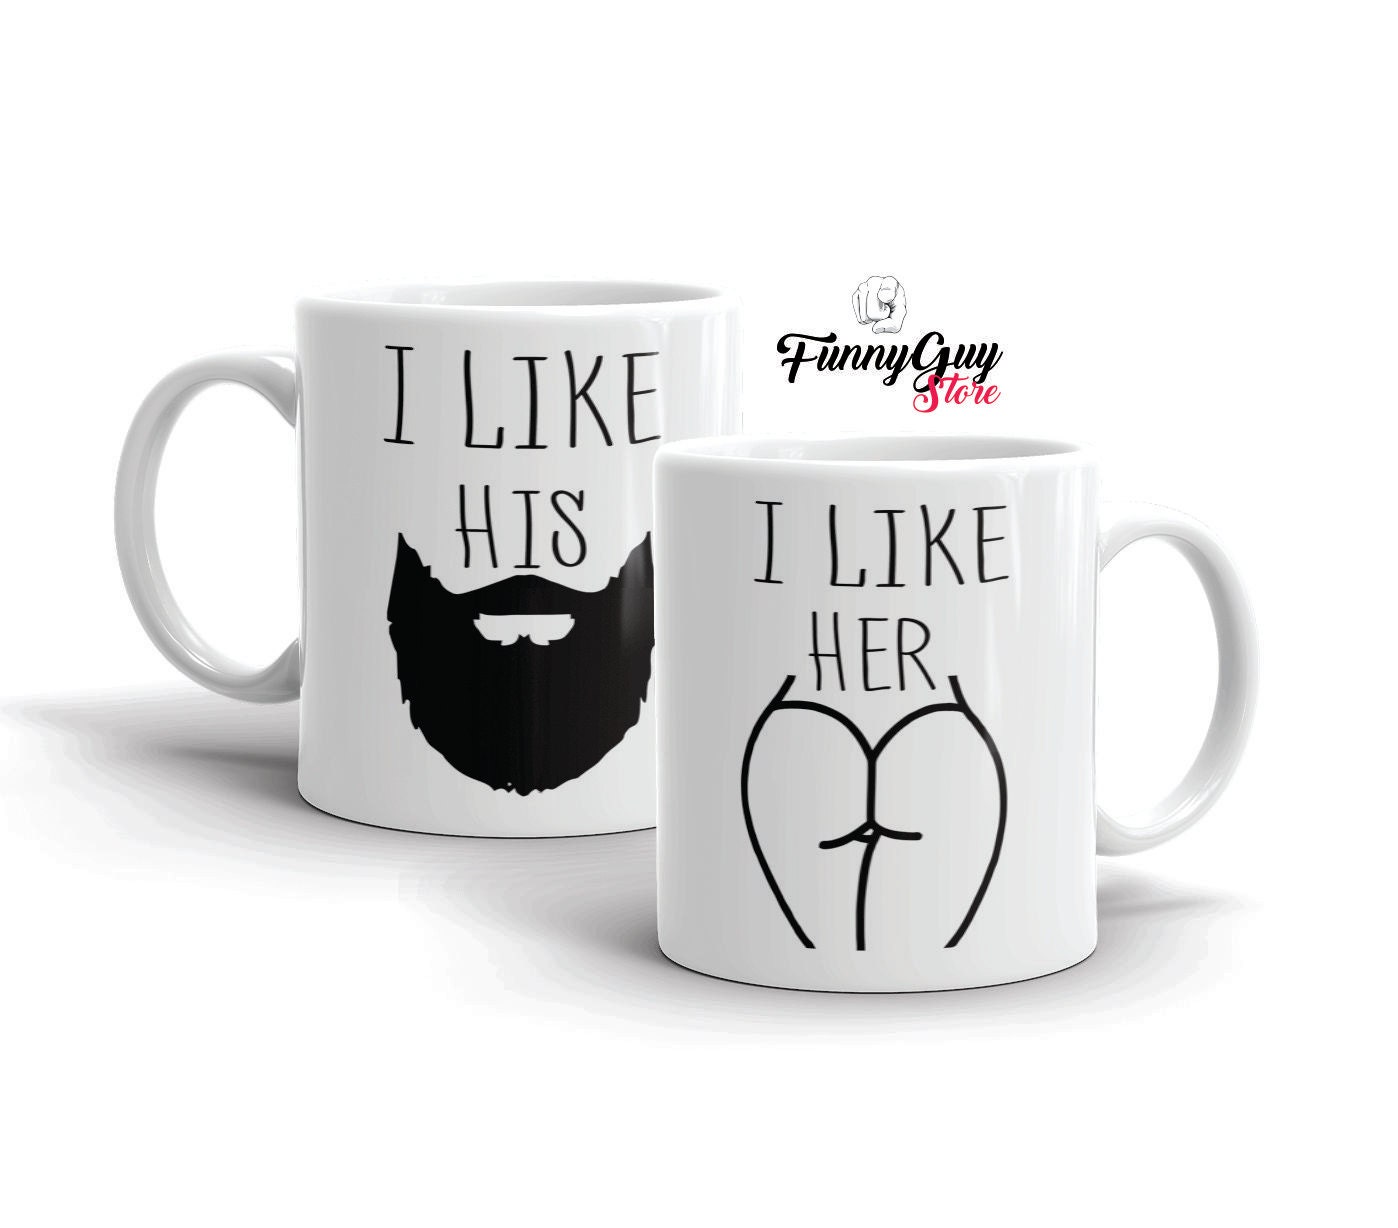 Triple Gifffted I Like His Beard Coffee Mugs For Couples, Funny Couple Gifts  for Anniversary, Engagement and Christmas, Girlfriend Unique Gifts, His and  Hers and For Bride and Groom Set of 2